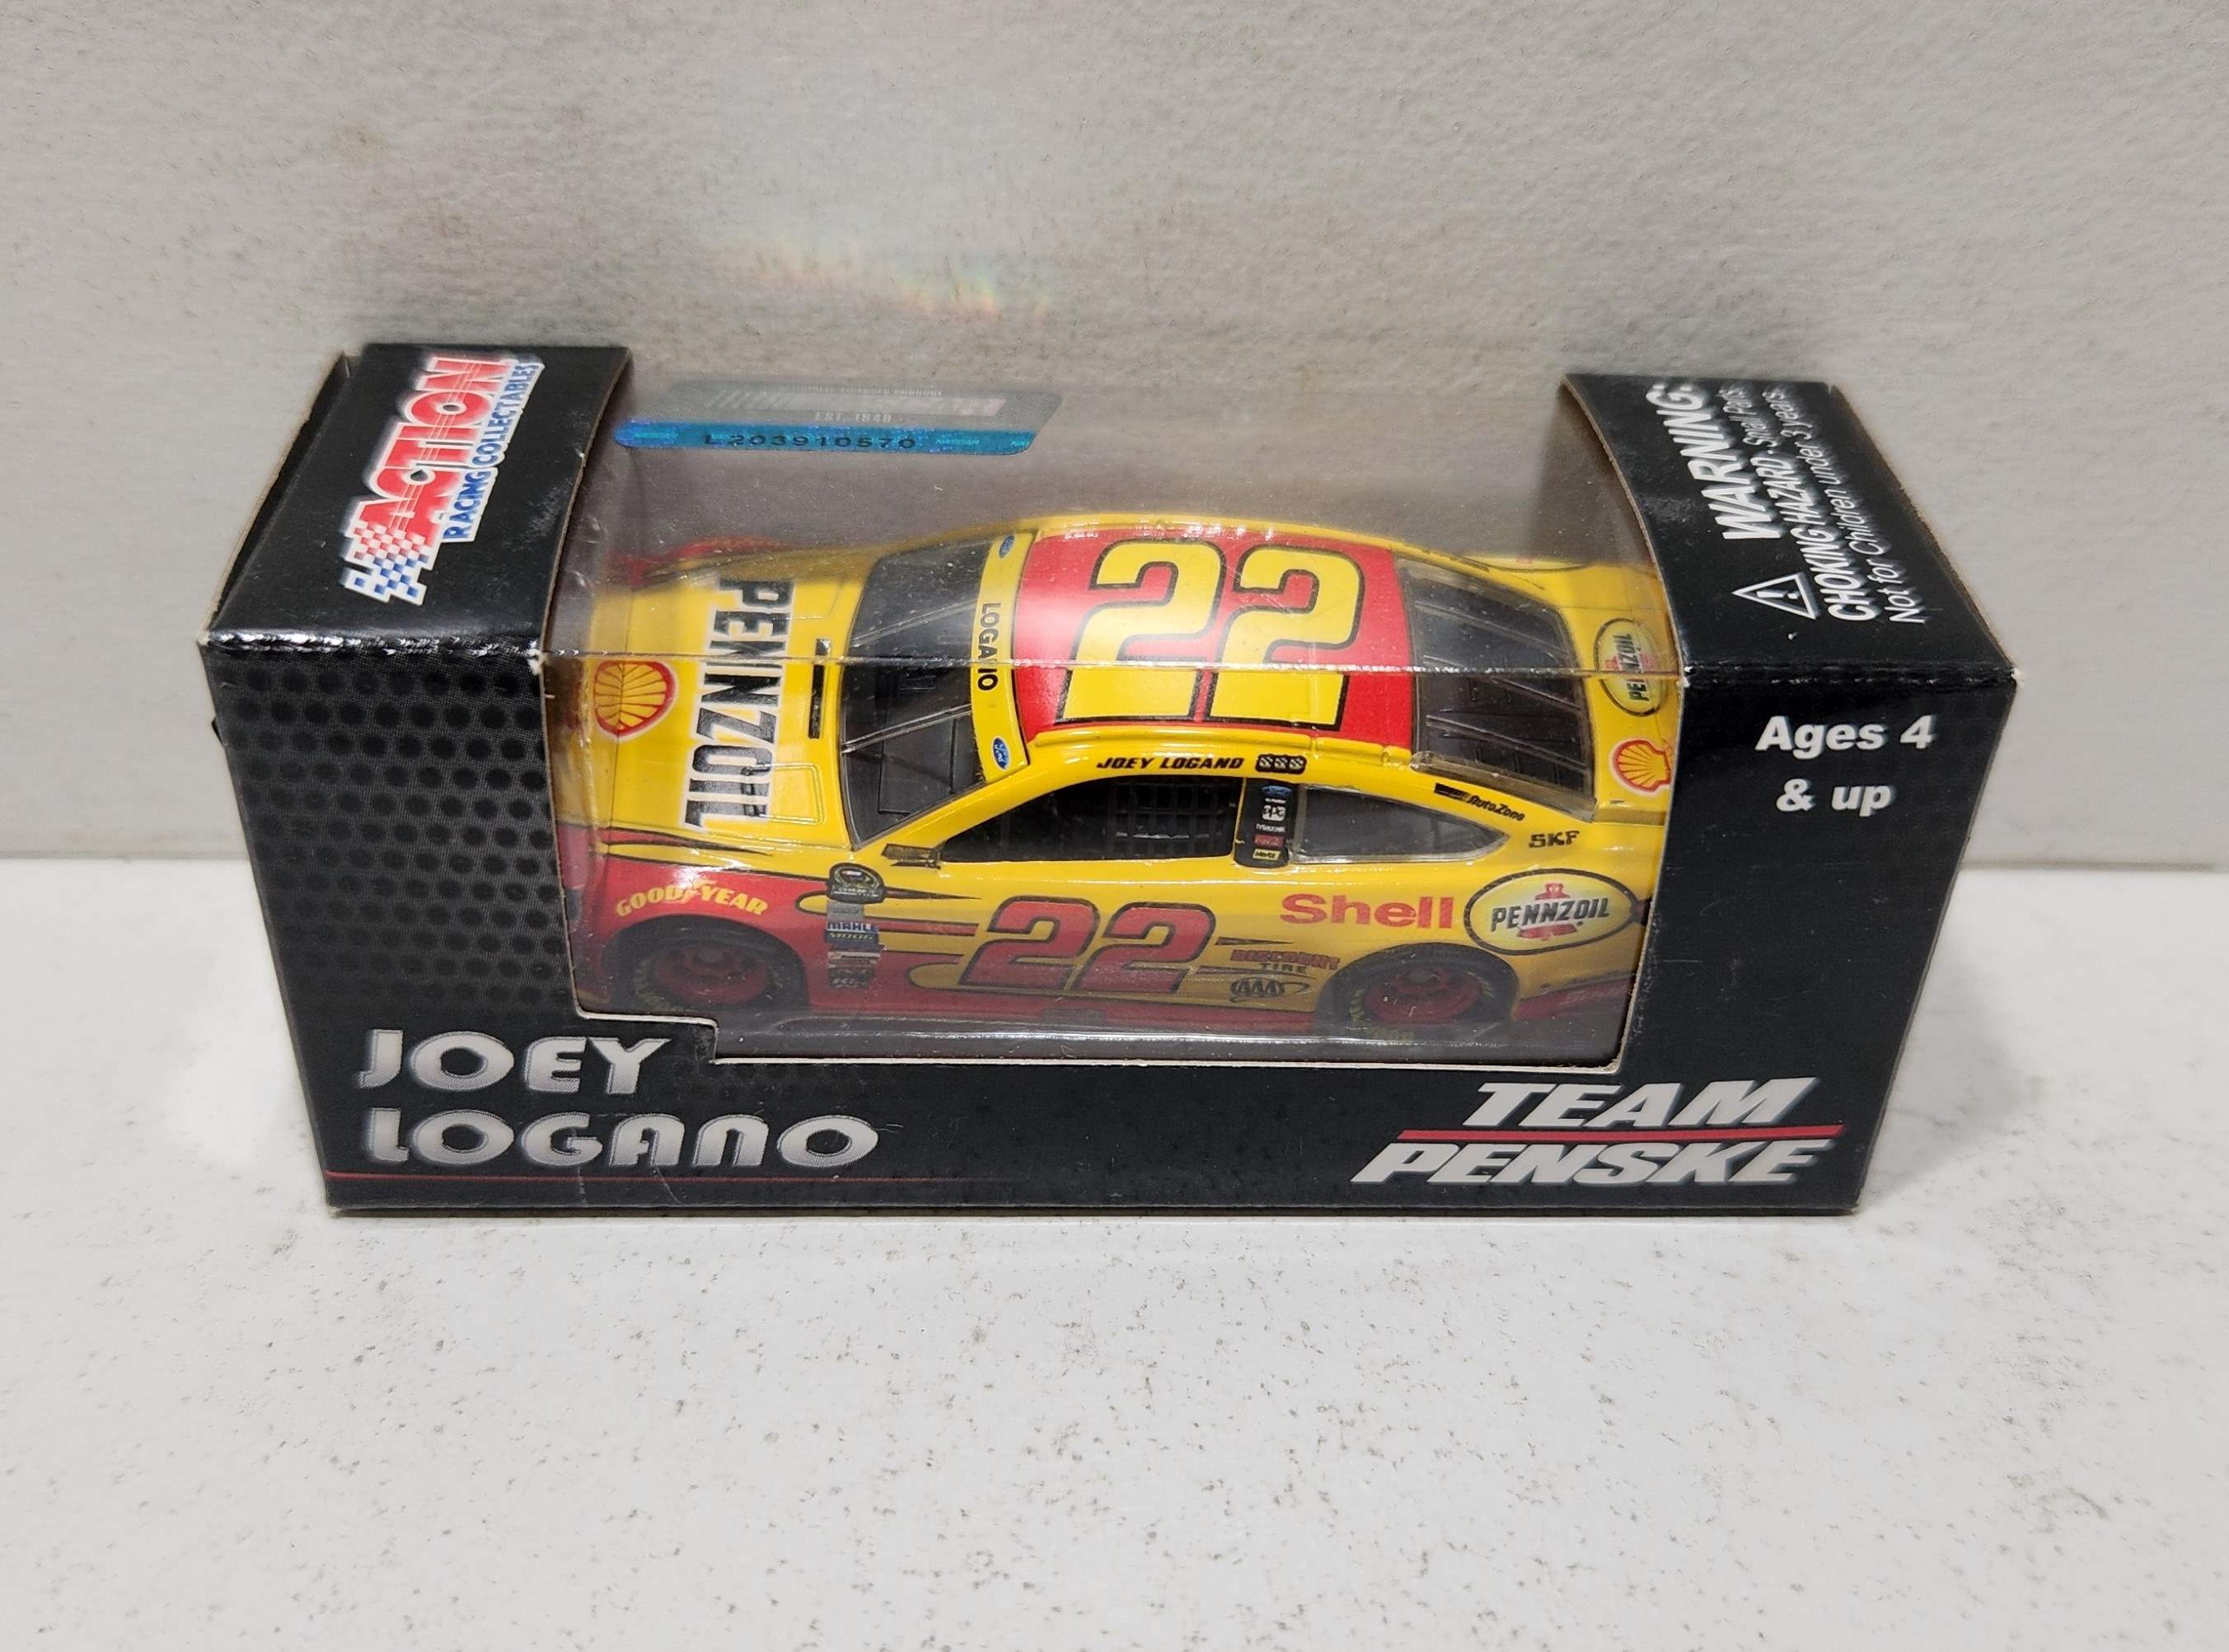 2014 Joey Logano 1/64th Shell "Chase for the Cup" Pitstop Series Fusion